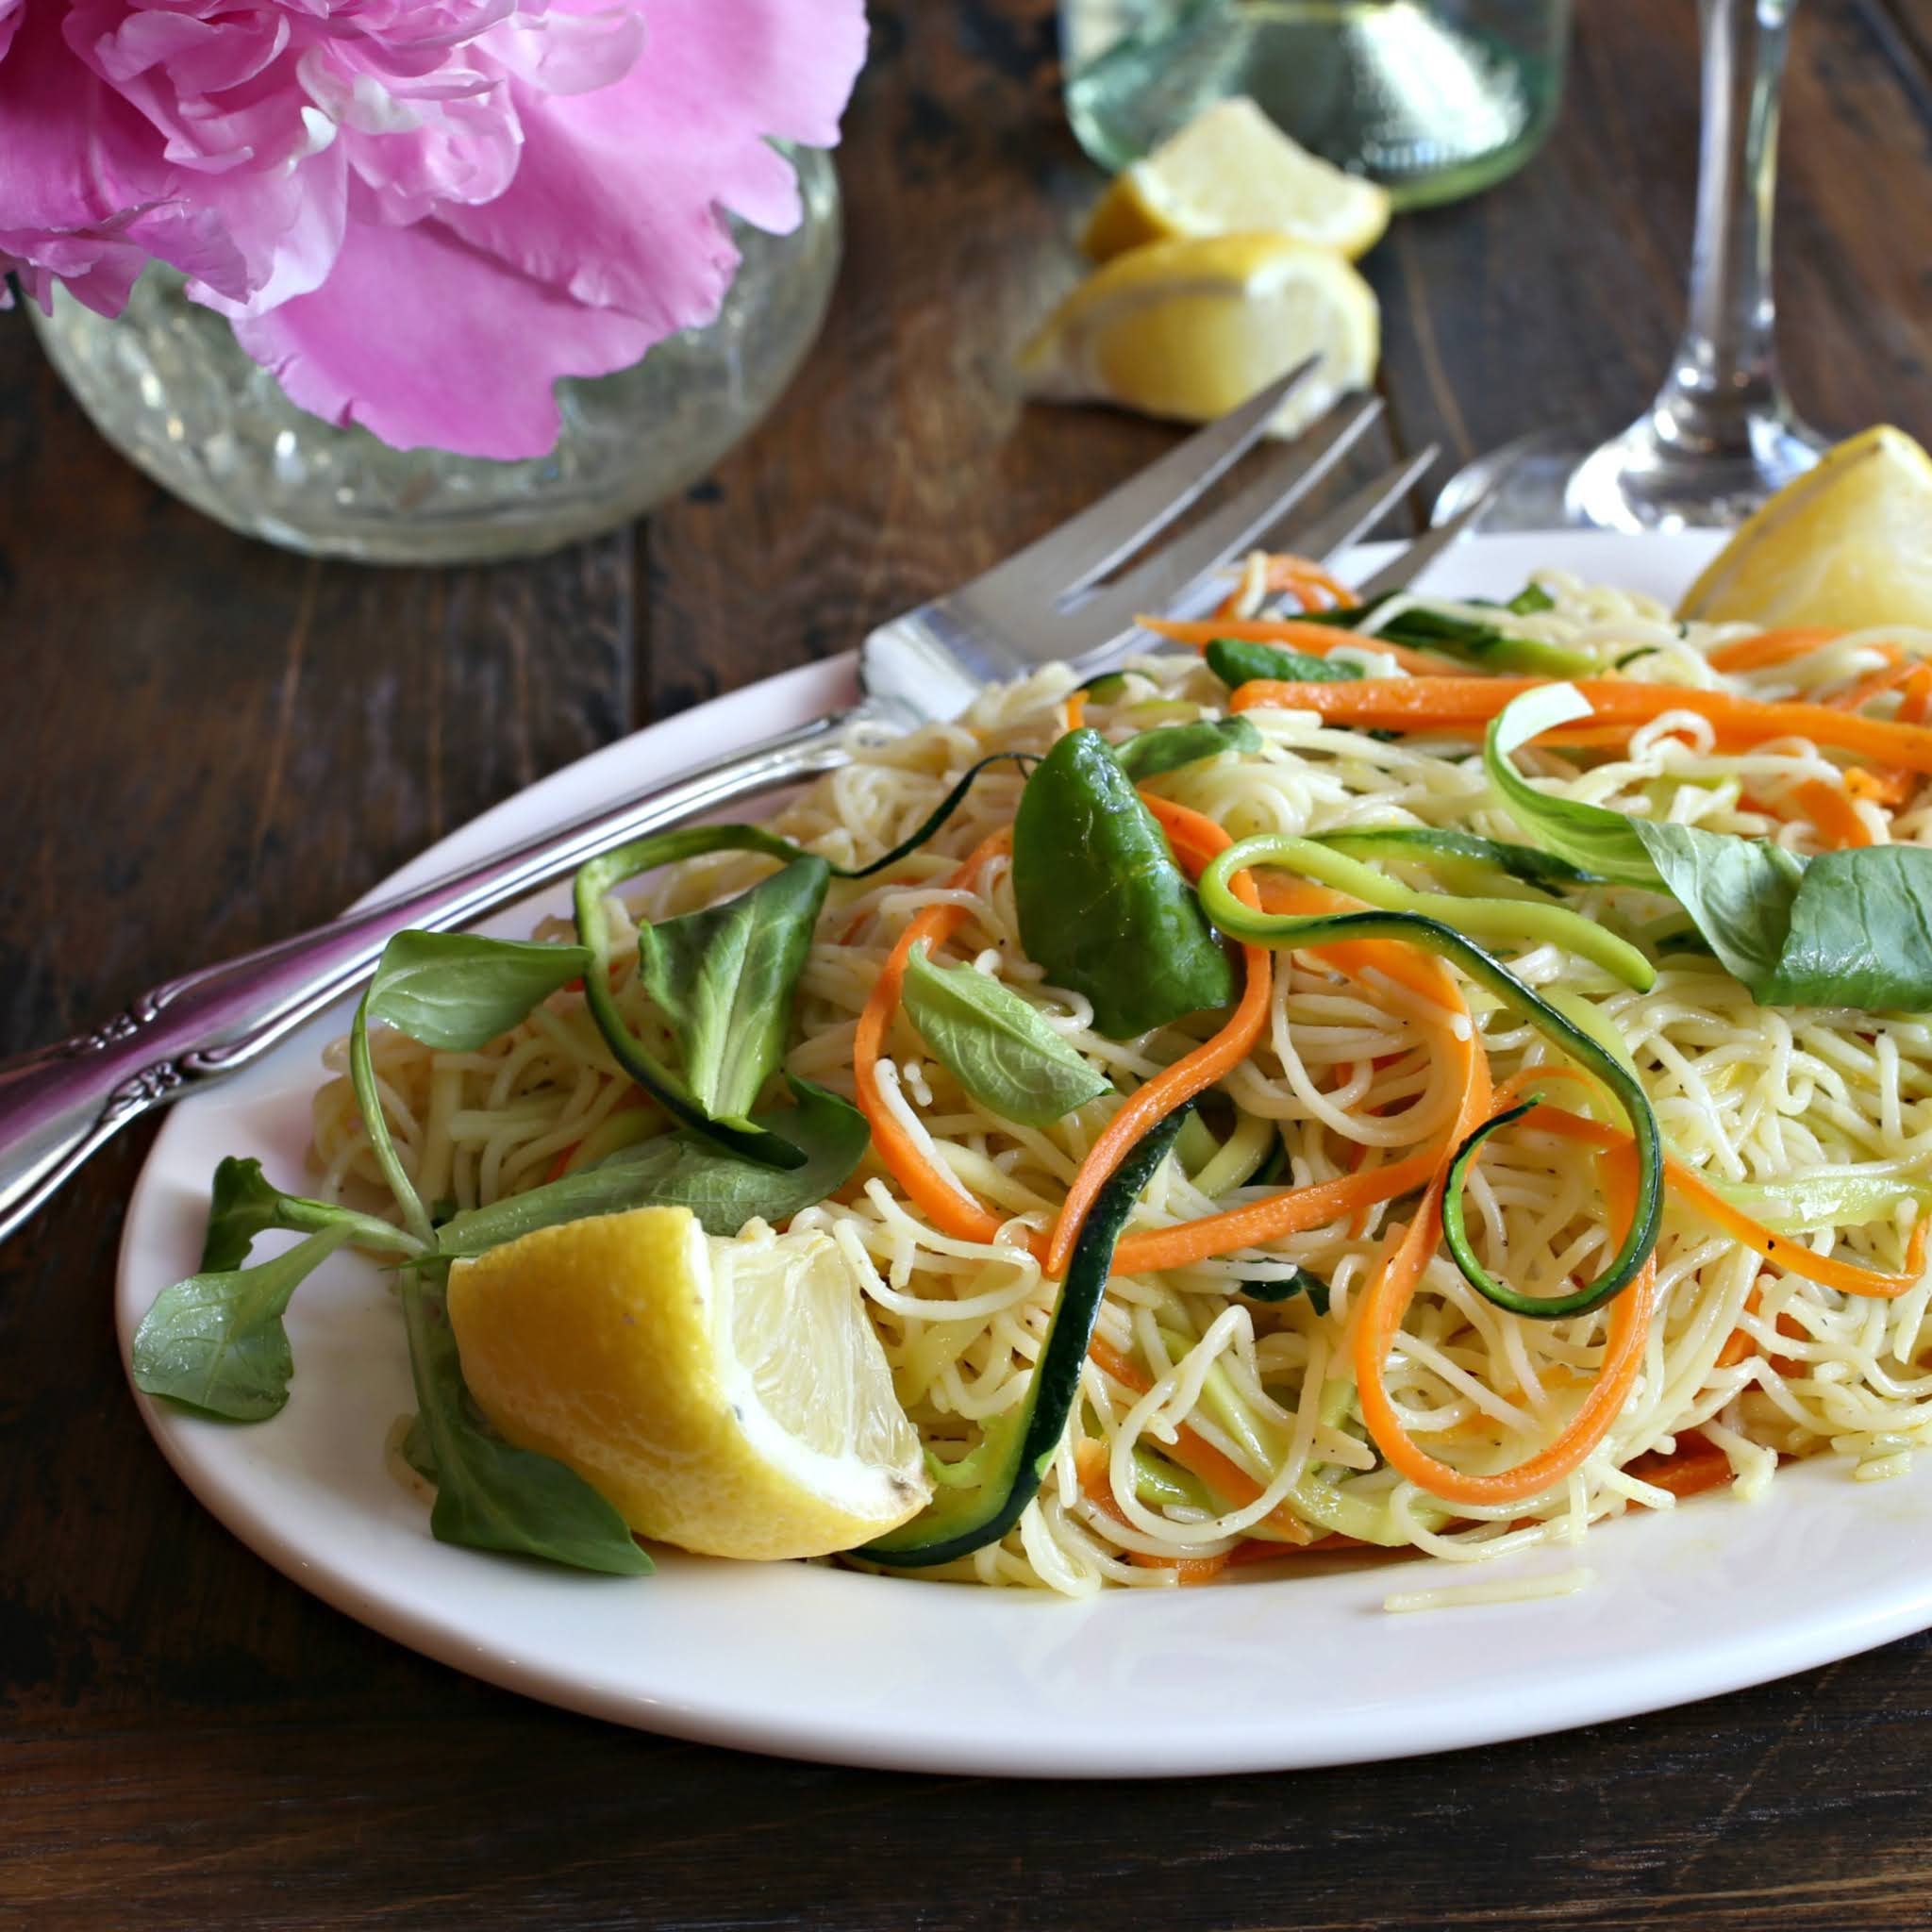 Recipe for a pasta dish with carrots and zucchini, flavored with olive oil and lemon zest.